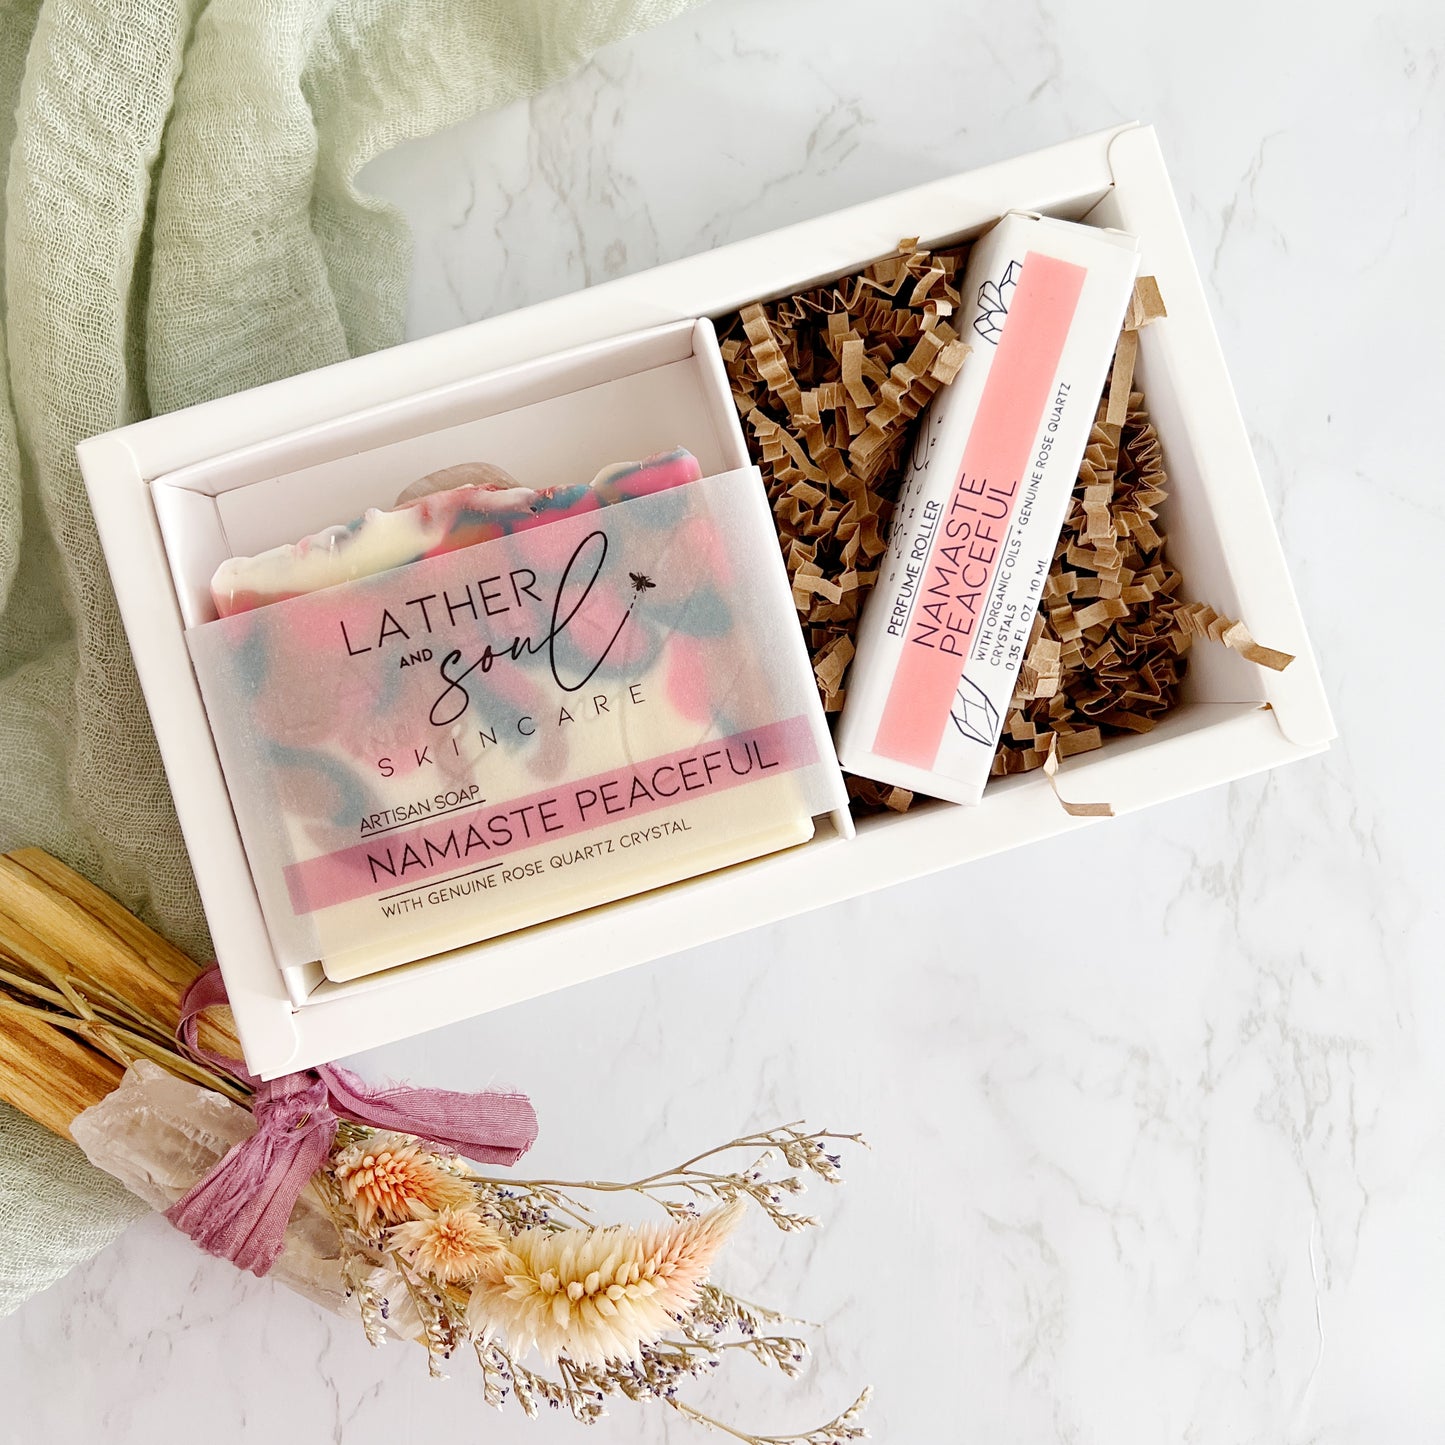 Treat mom with an affordable soap gift set for Mother's Day